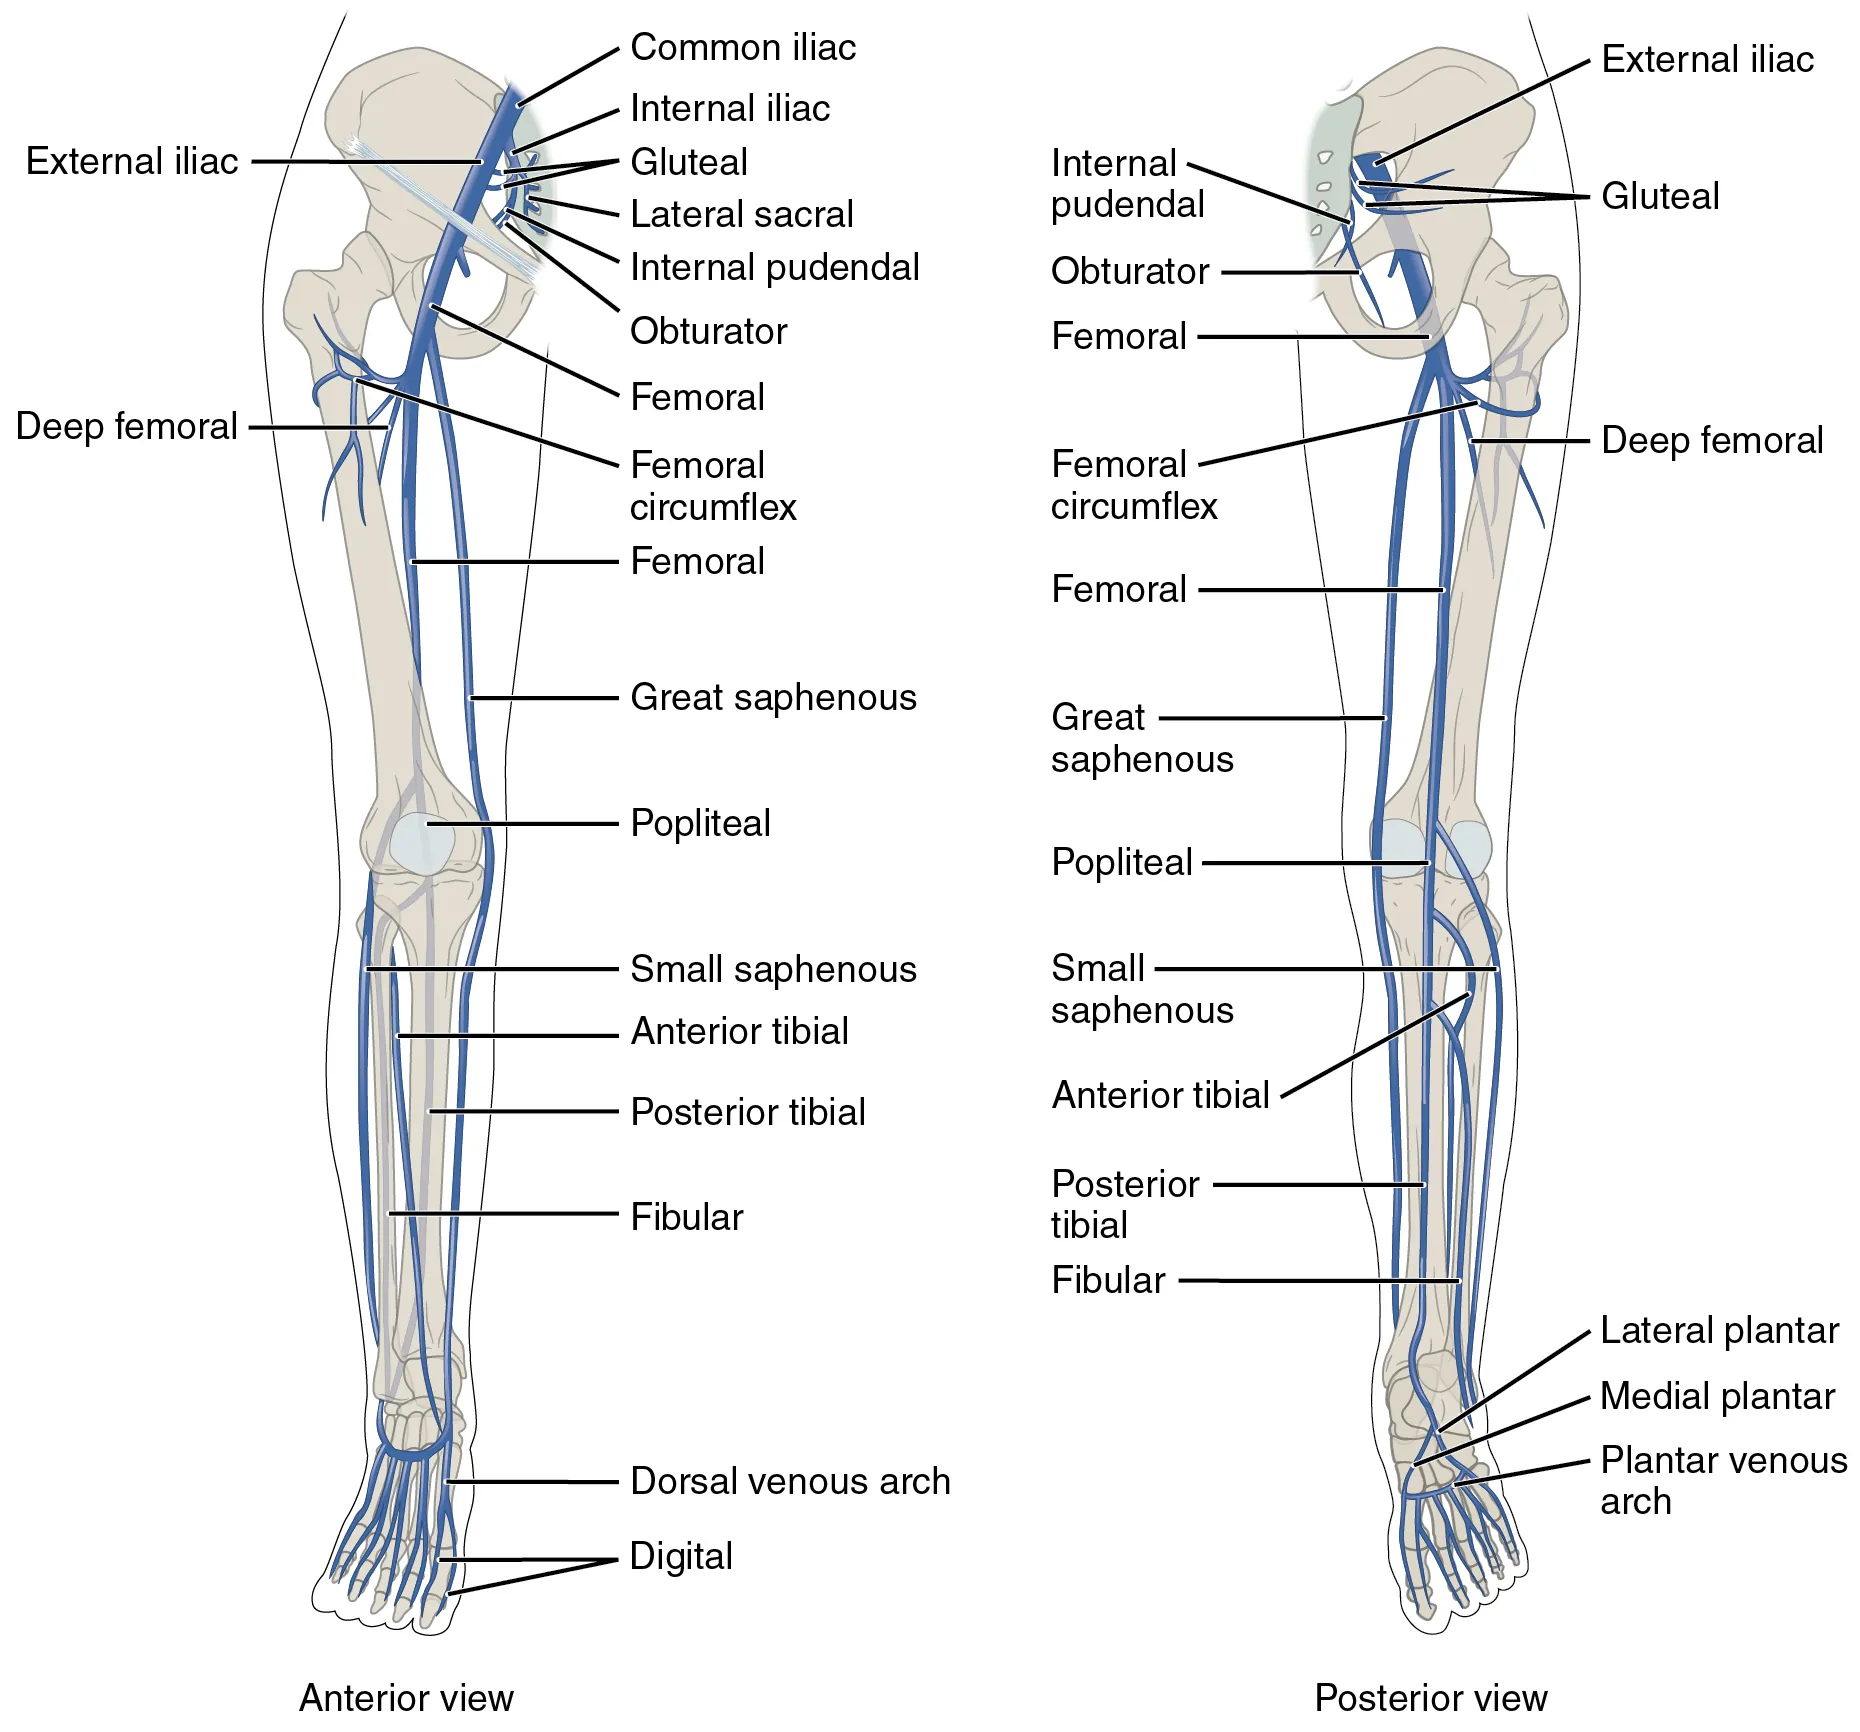 The left panel shows the anterior view of veins in the legs, and the right panel shows the posterior view.